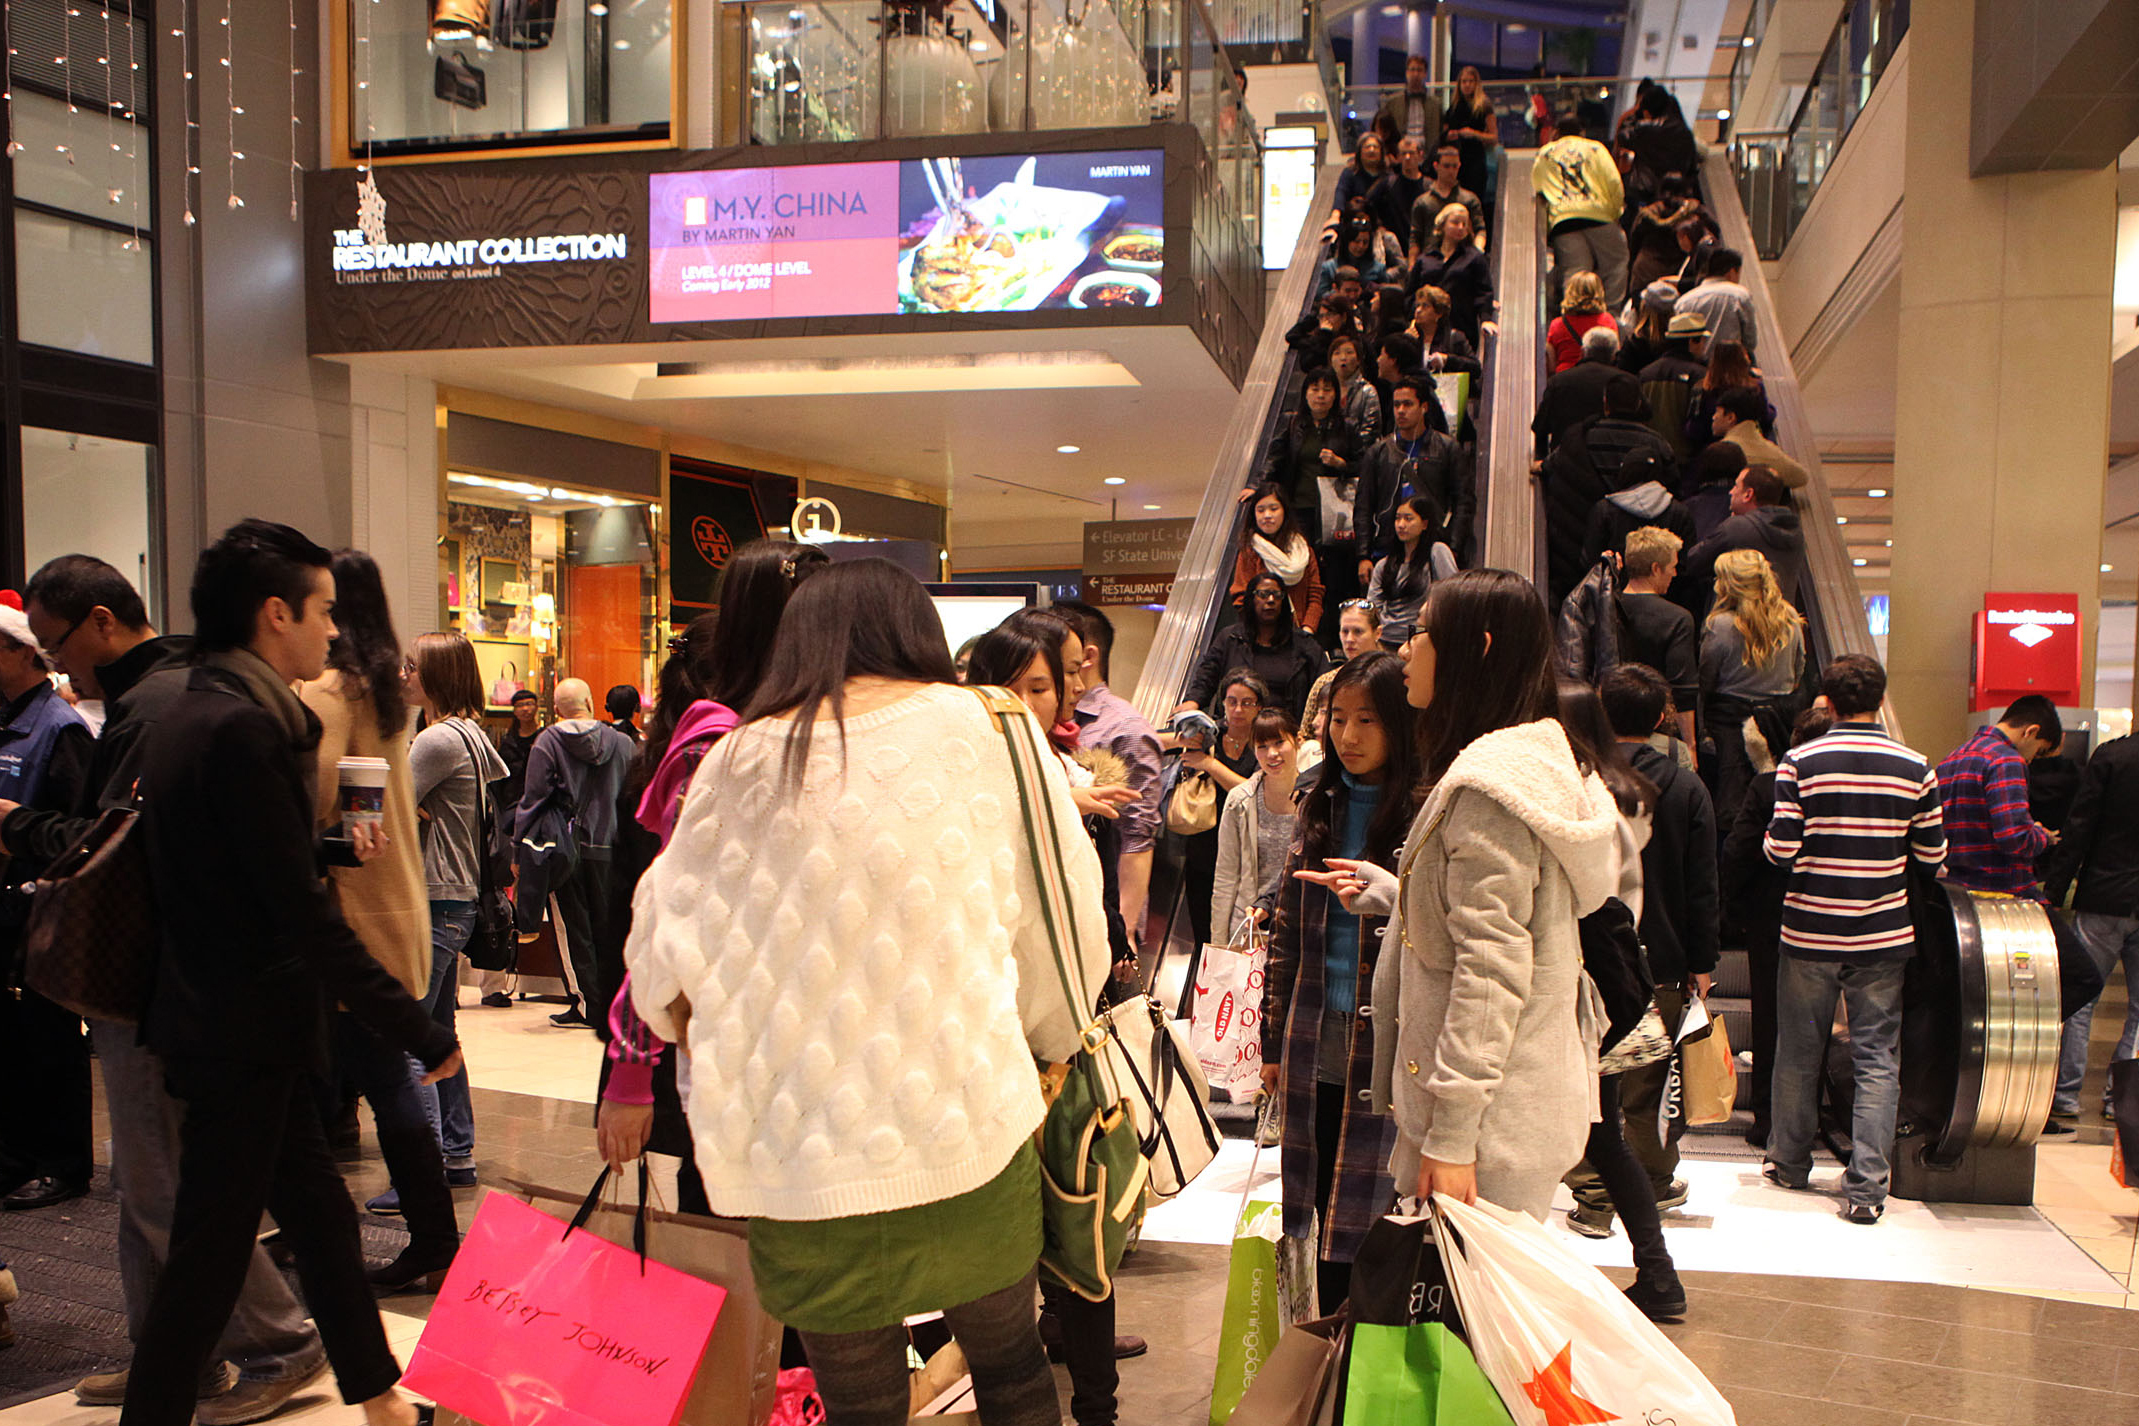 Crowded mall interior with busy escalators and many shoppers carrying bags.